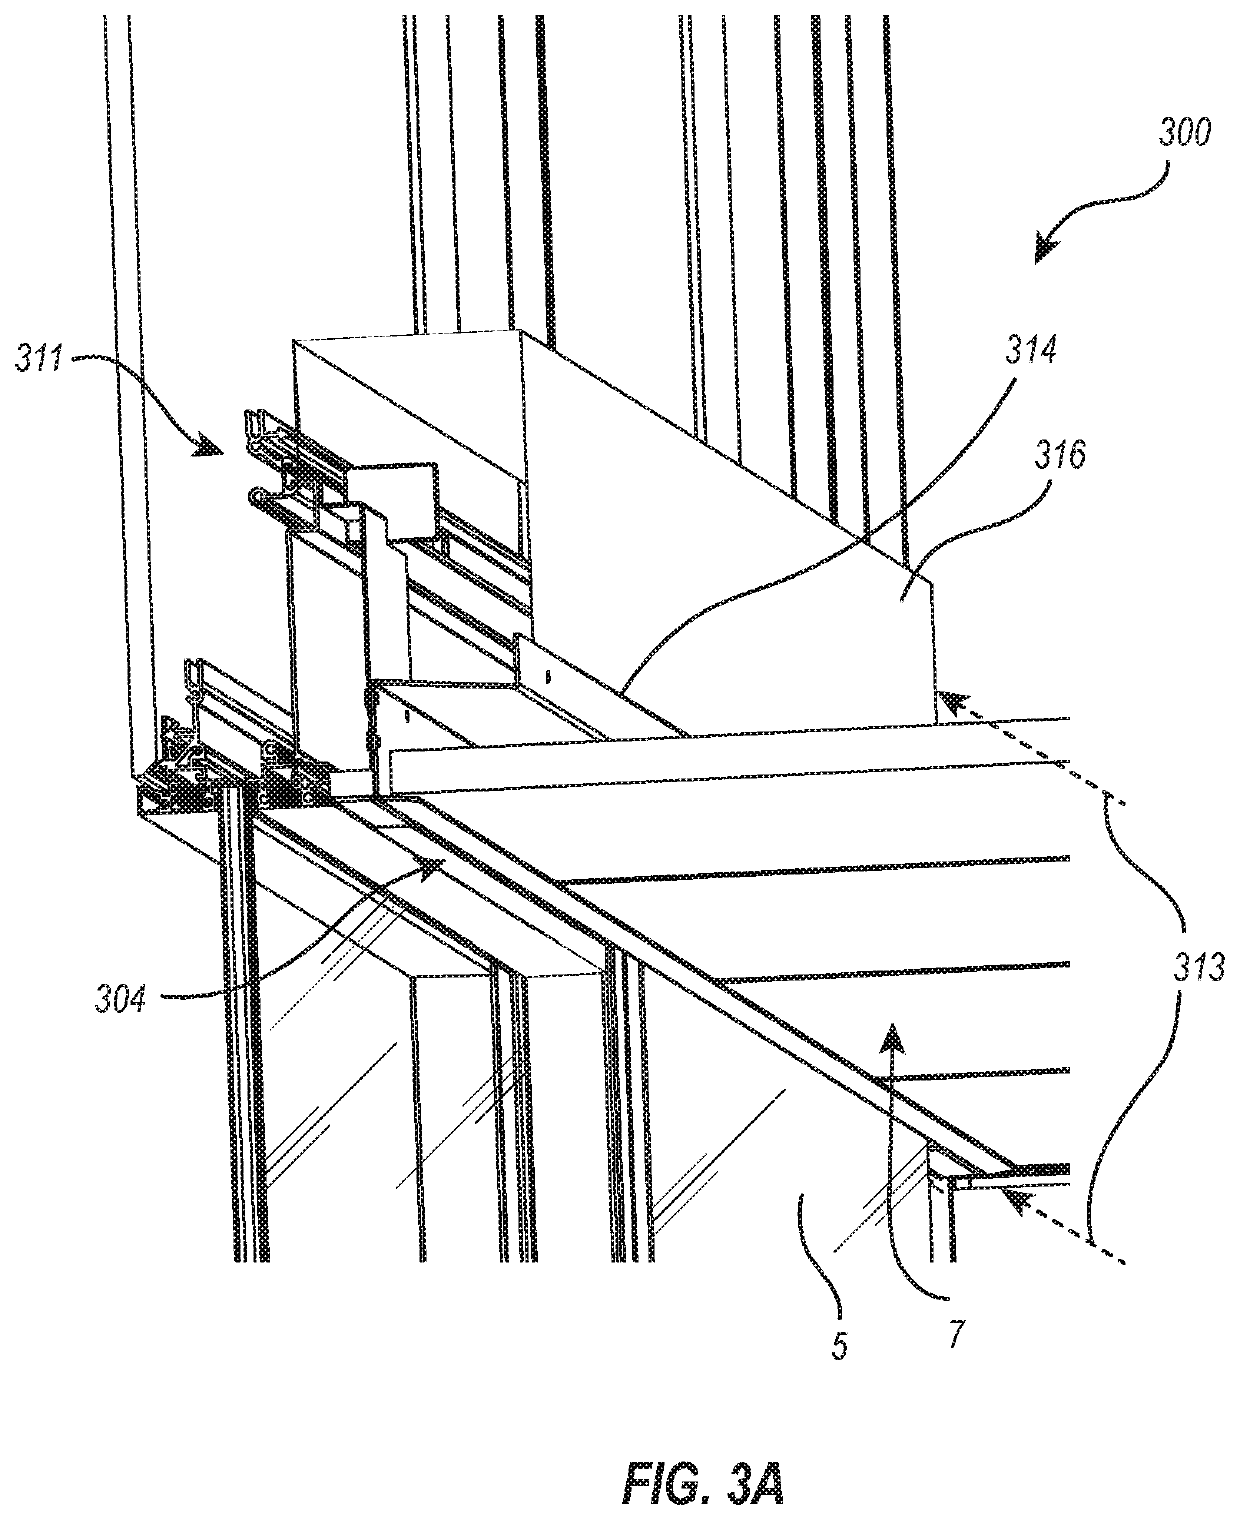 Door track and ceiling suspension systems and methods